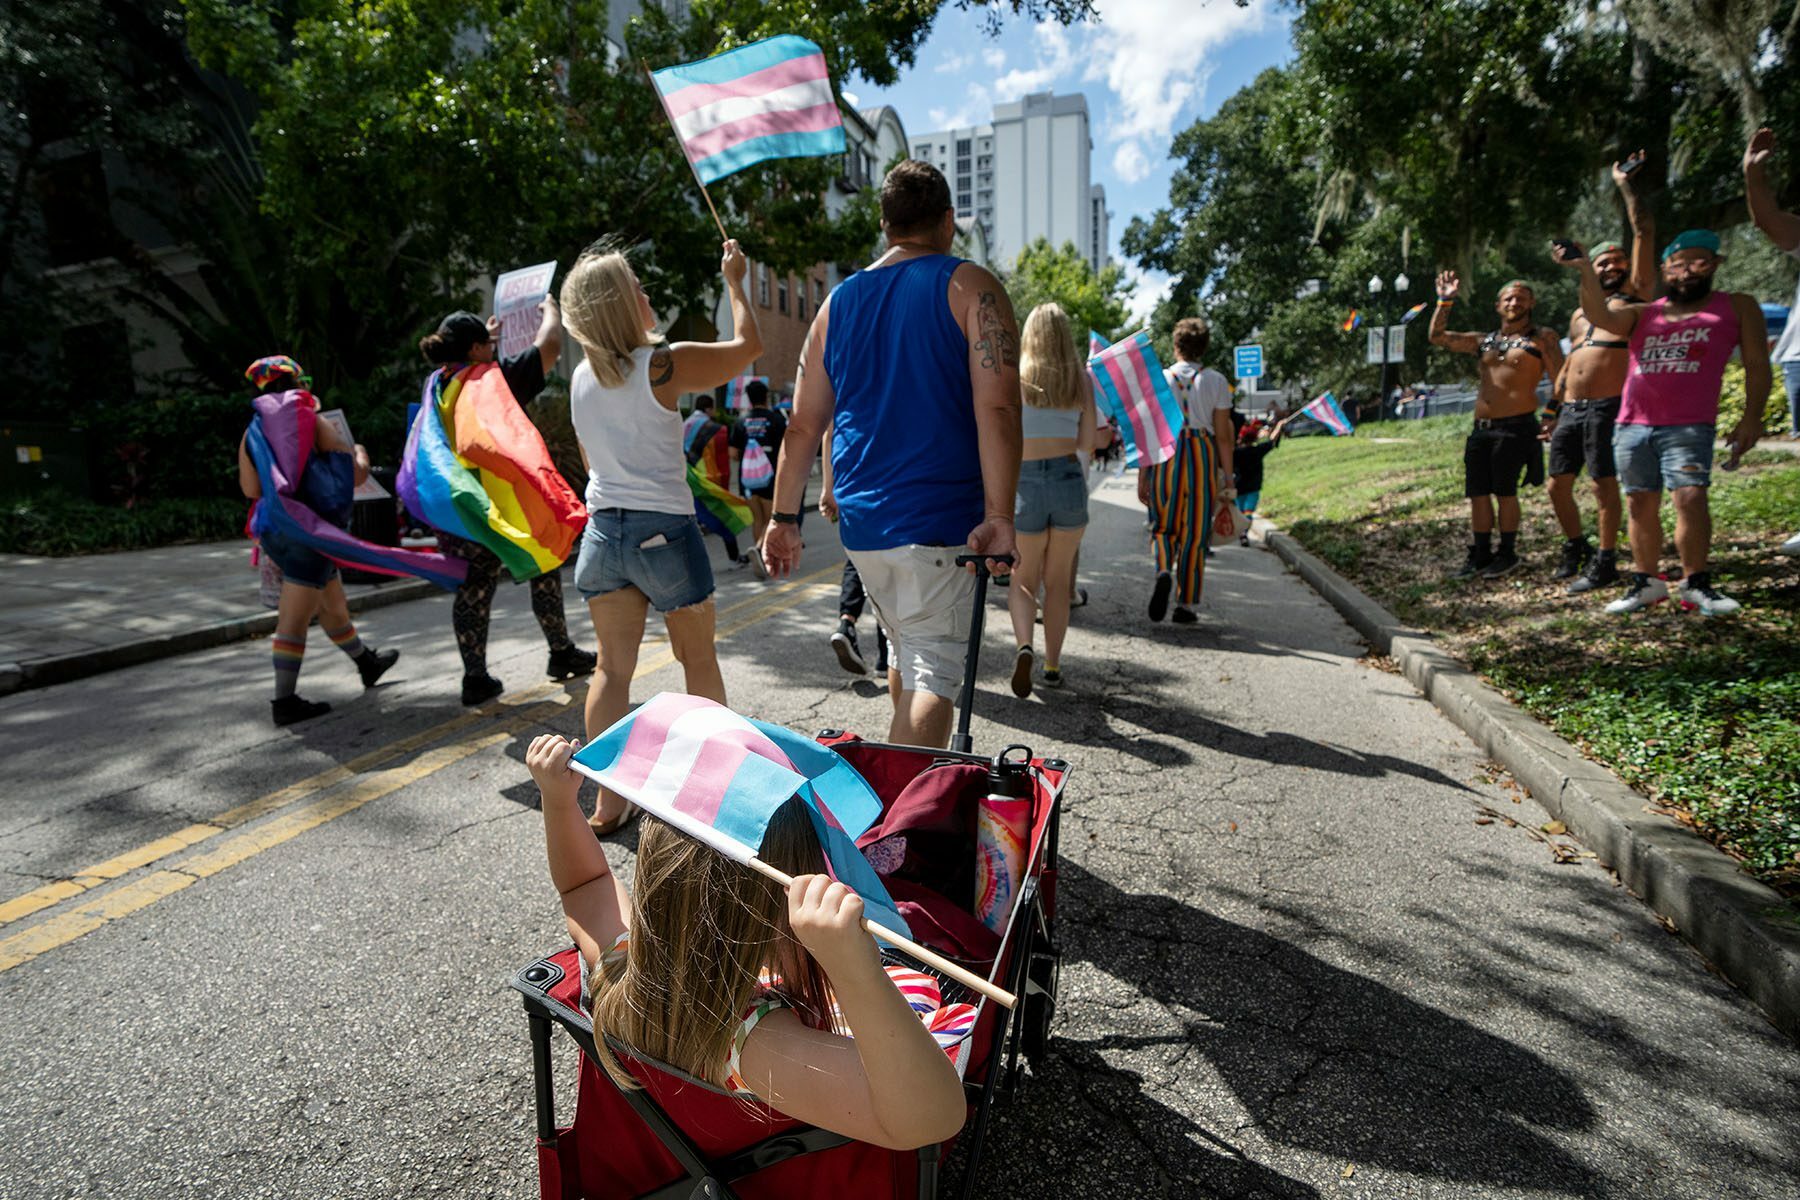 Participants wave flags at the National Trans Visibility March in Orlando, Florida.